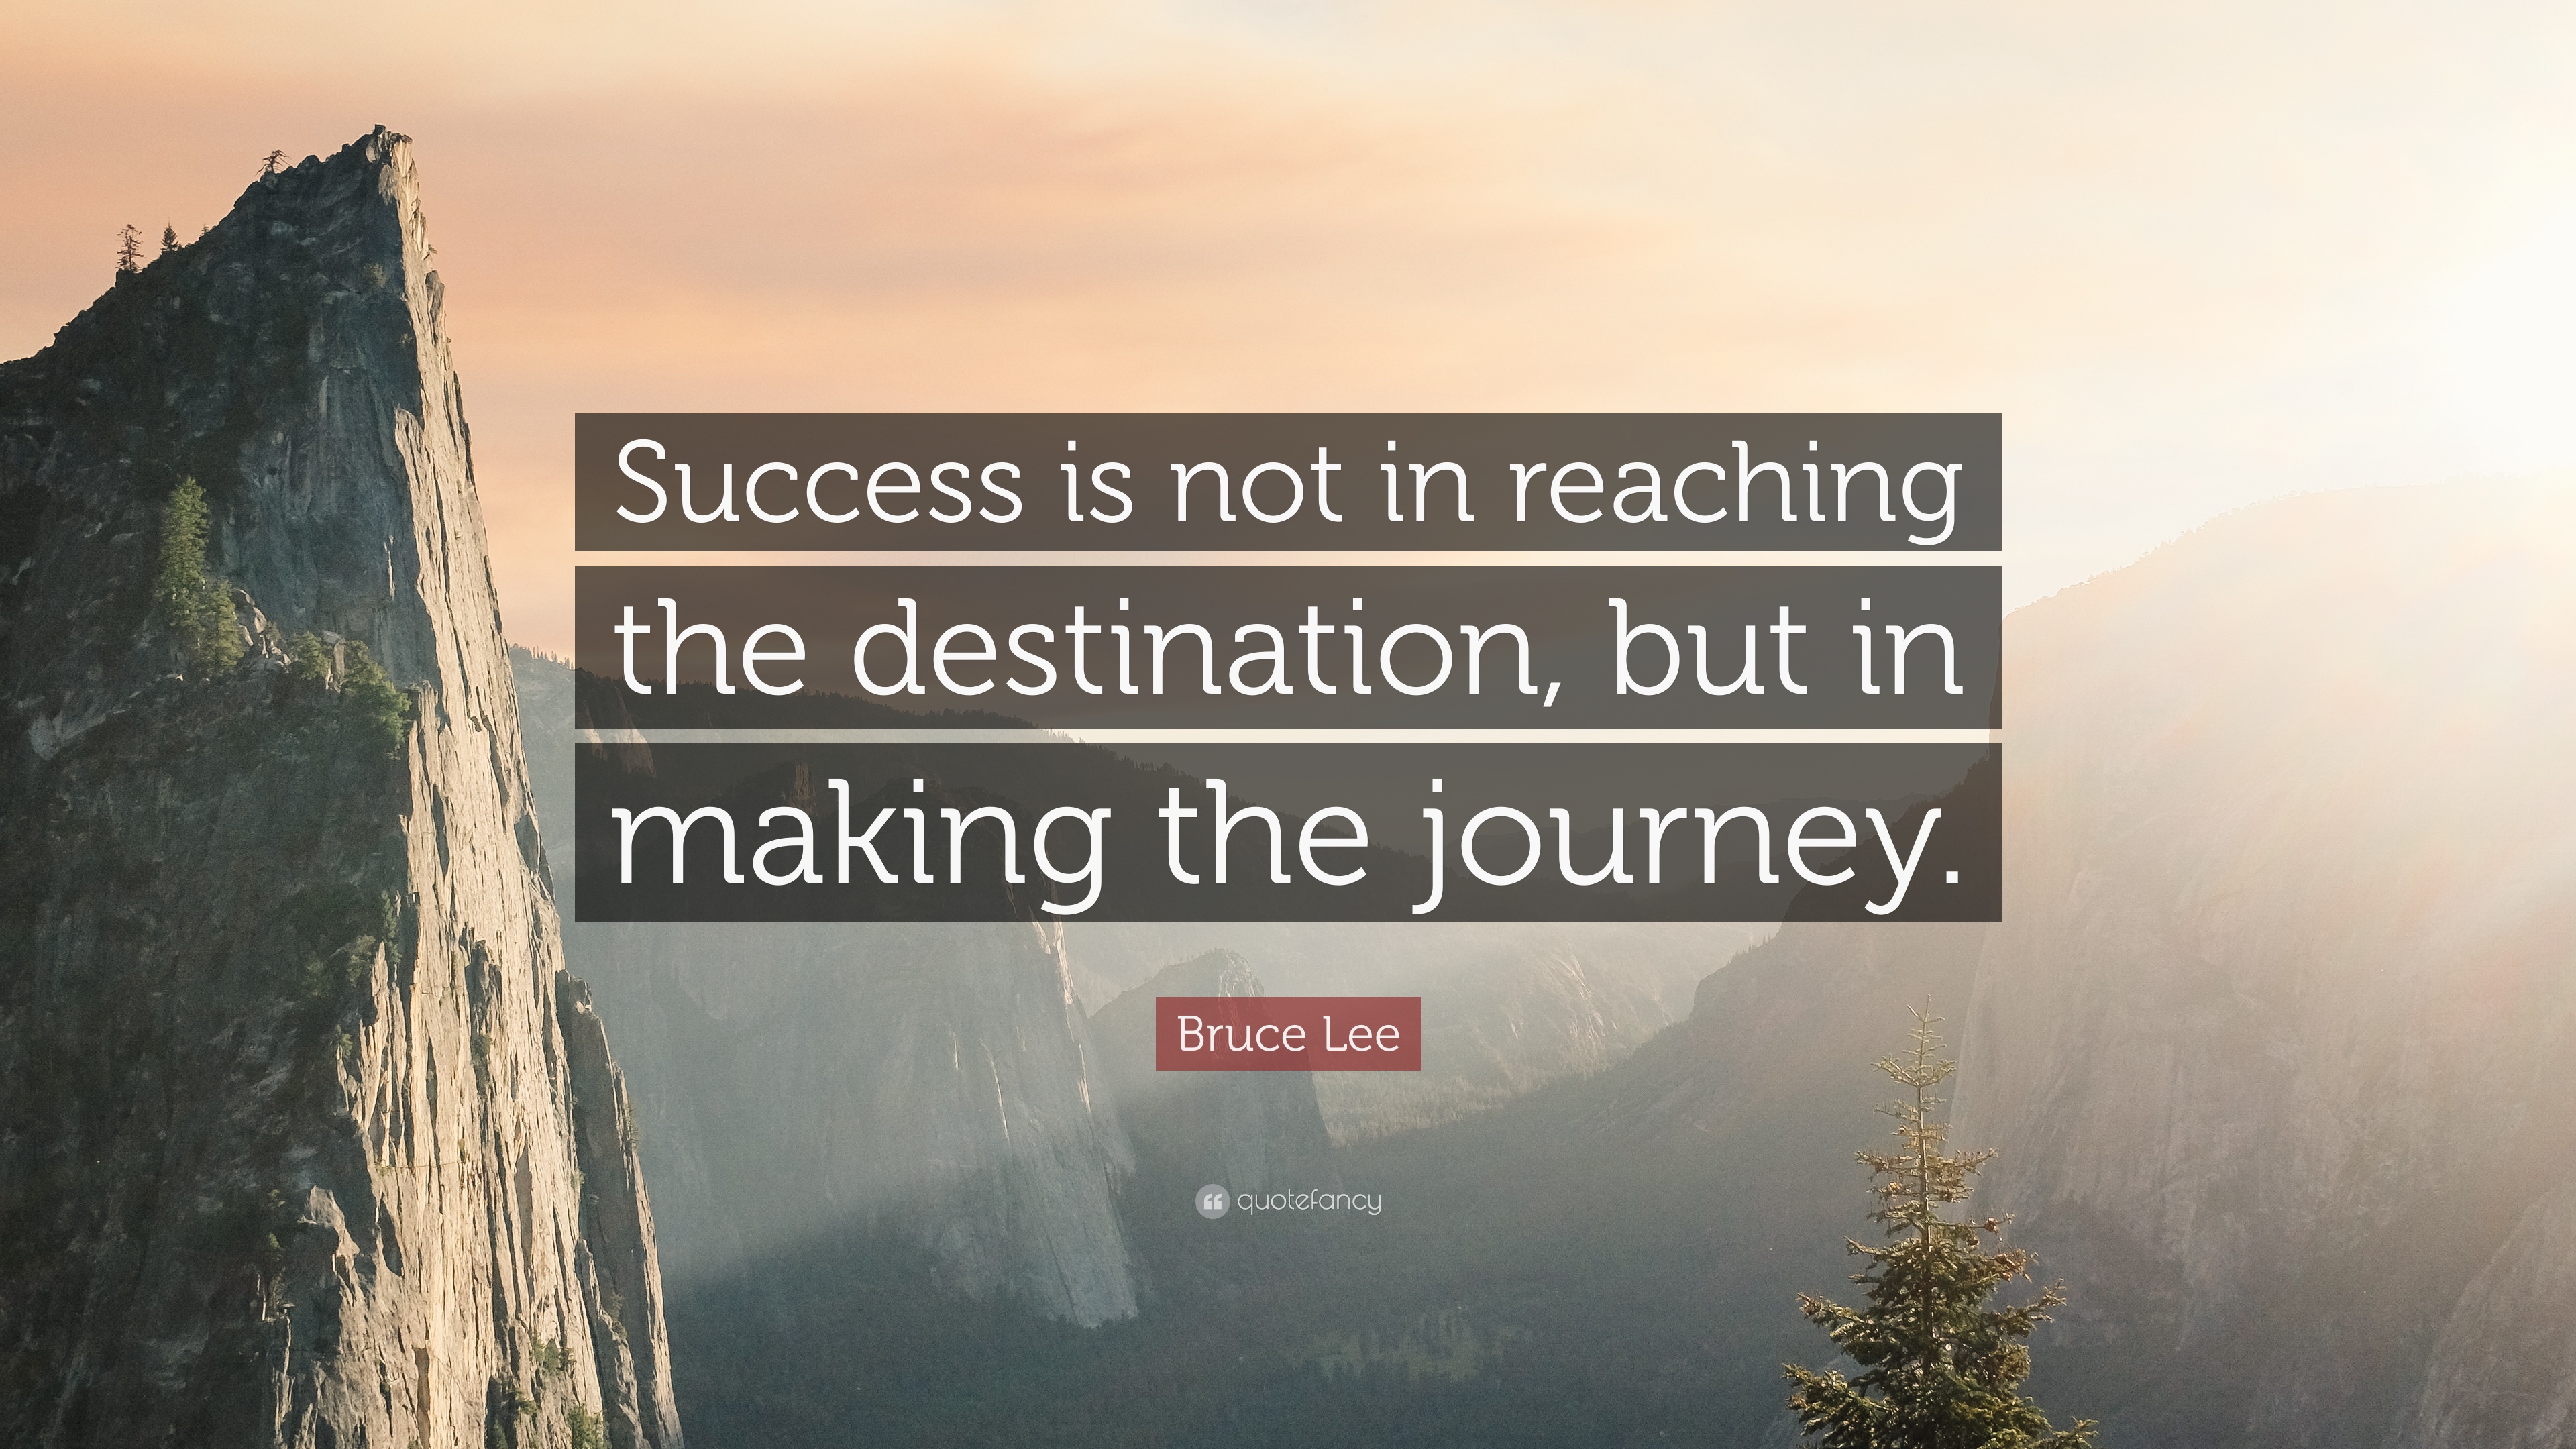 Bruce Lee Quote: “Success is not in reaching the destination, but in ...